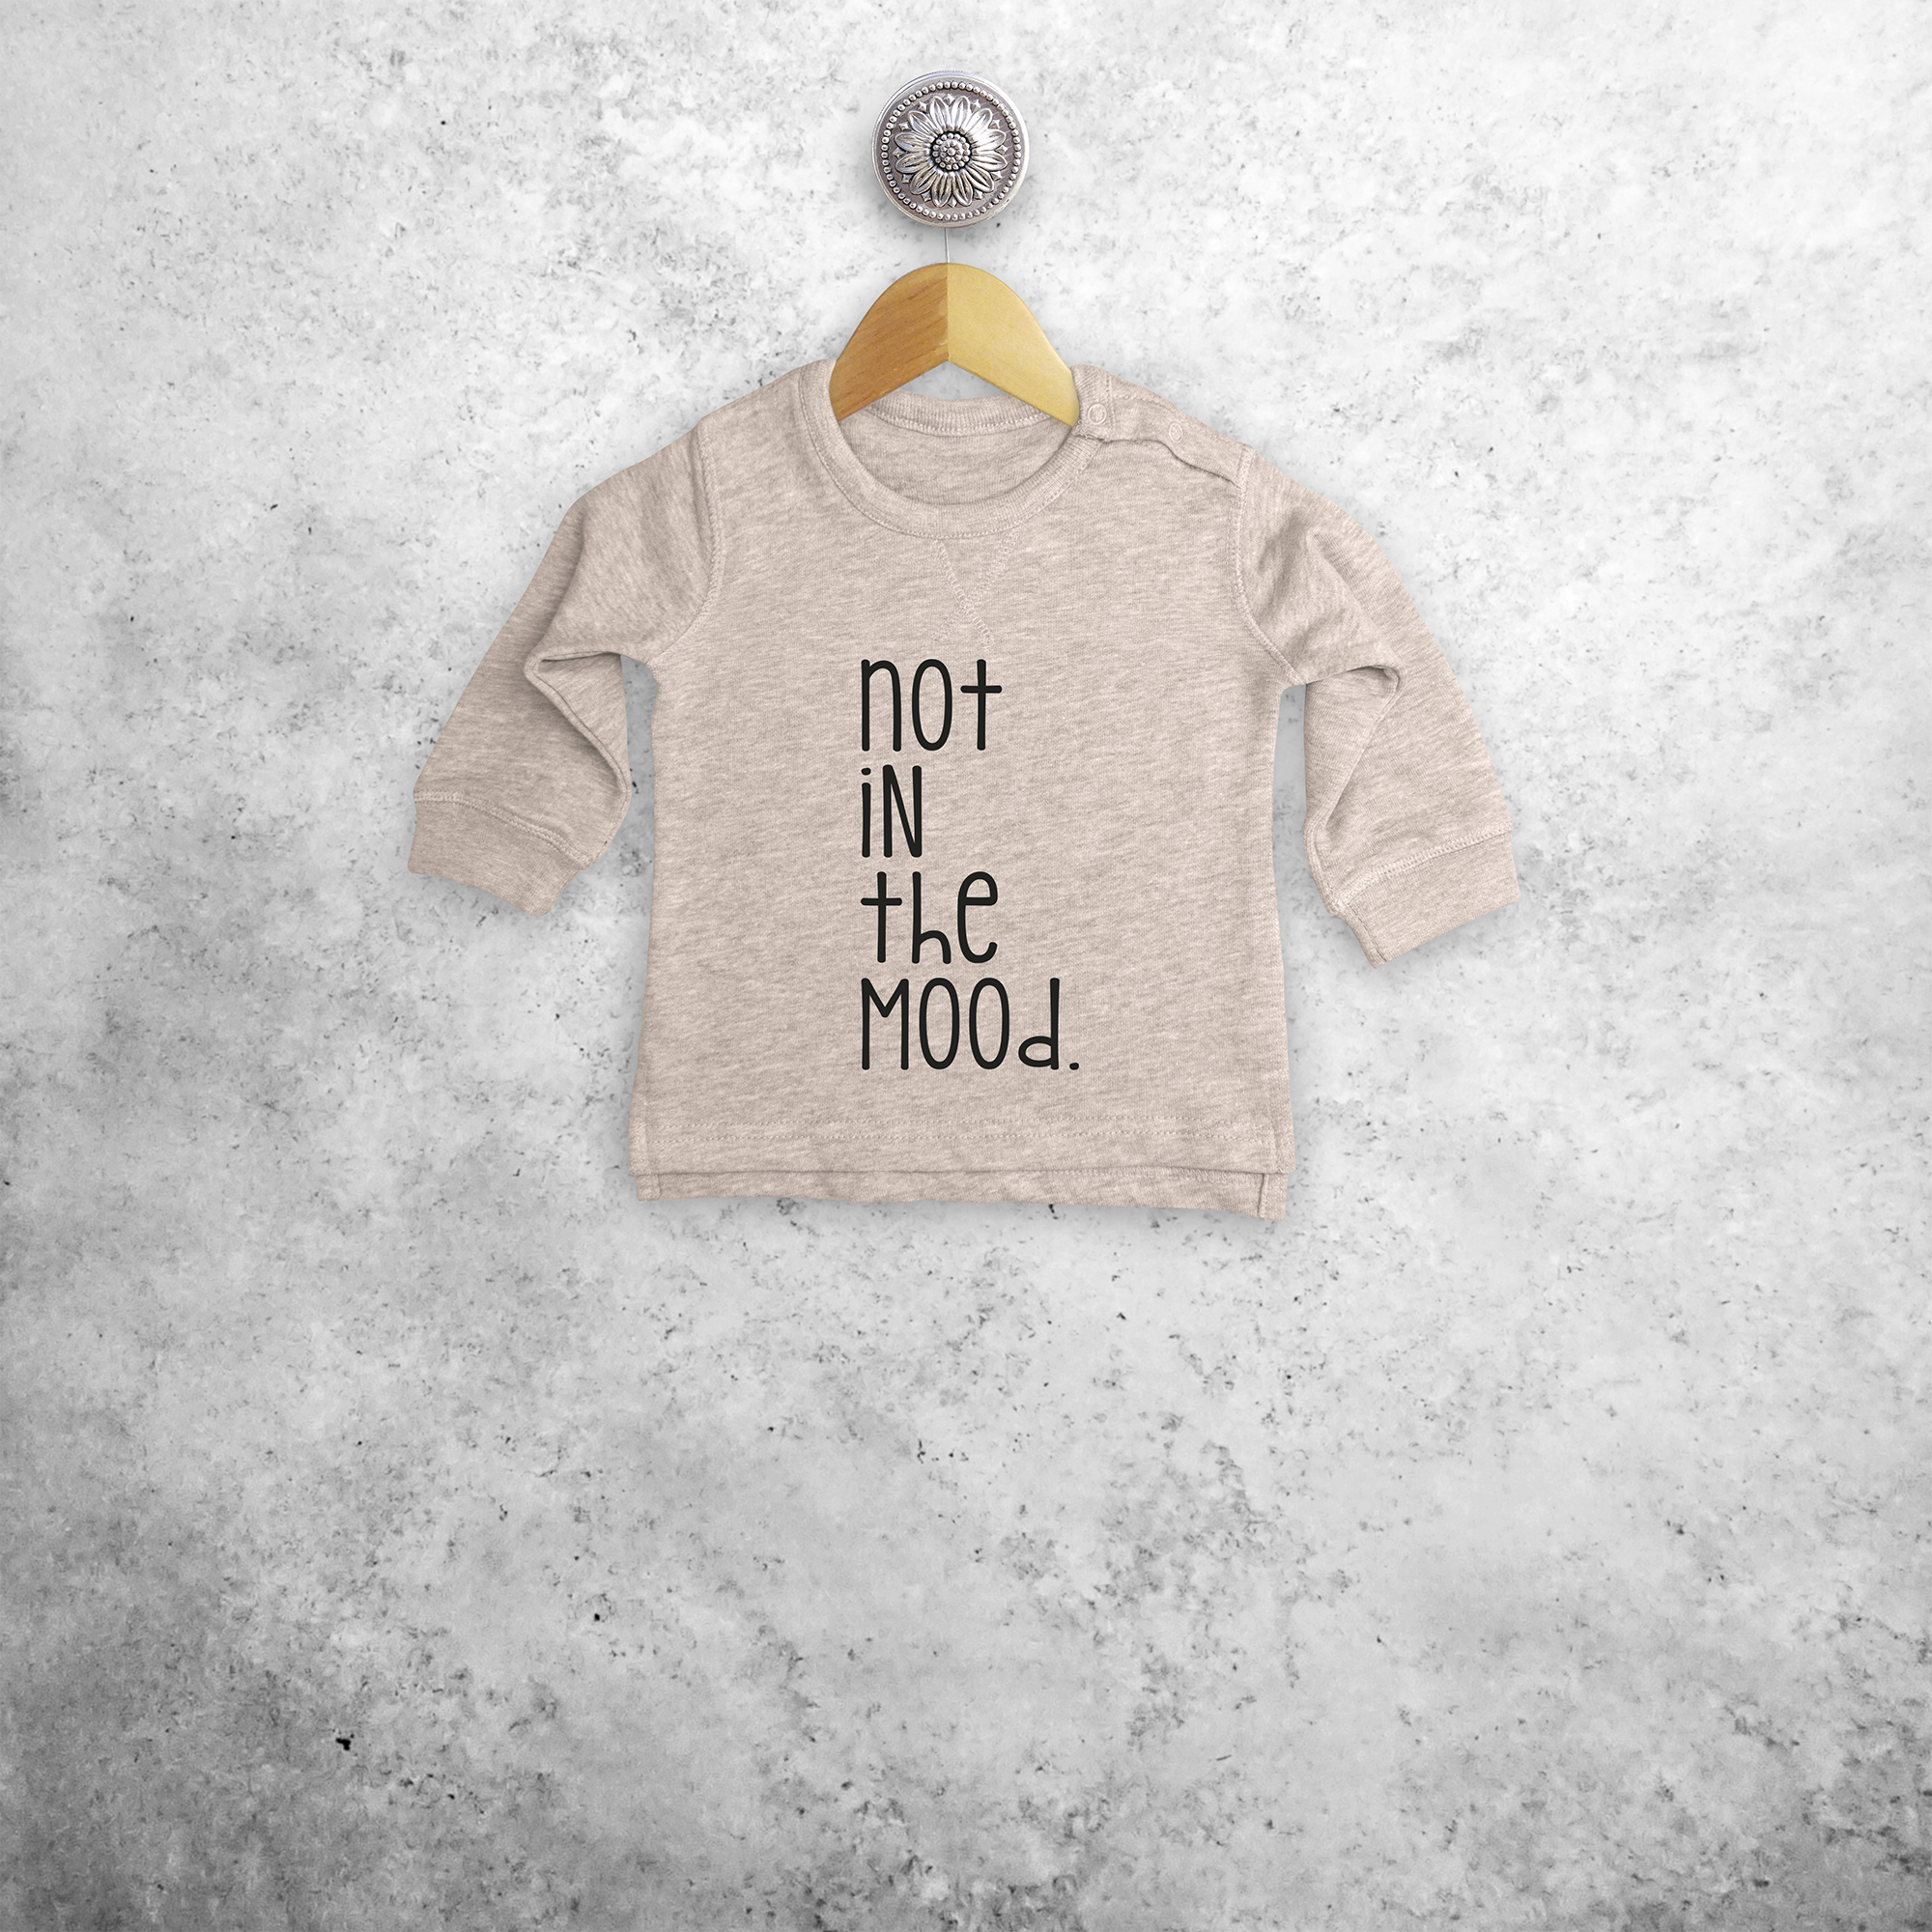 'Not in the mood' baby sweater